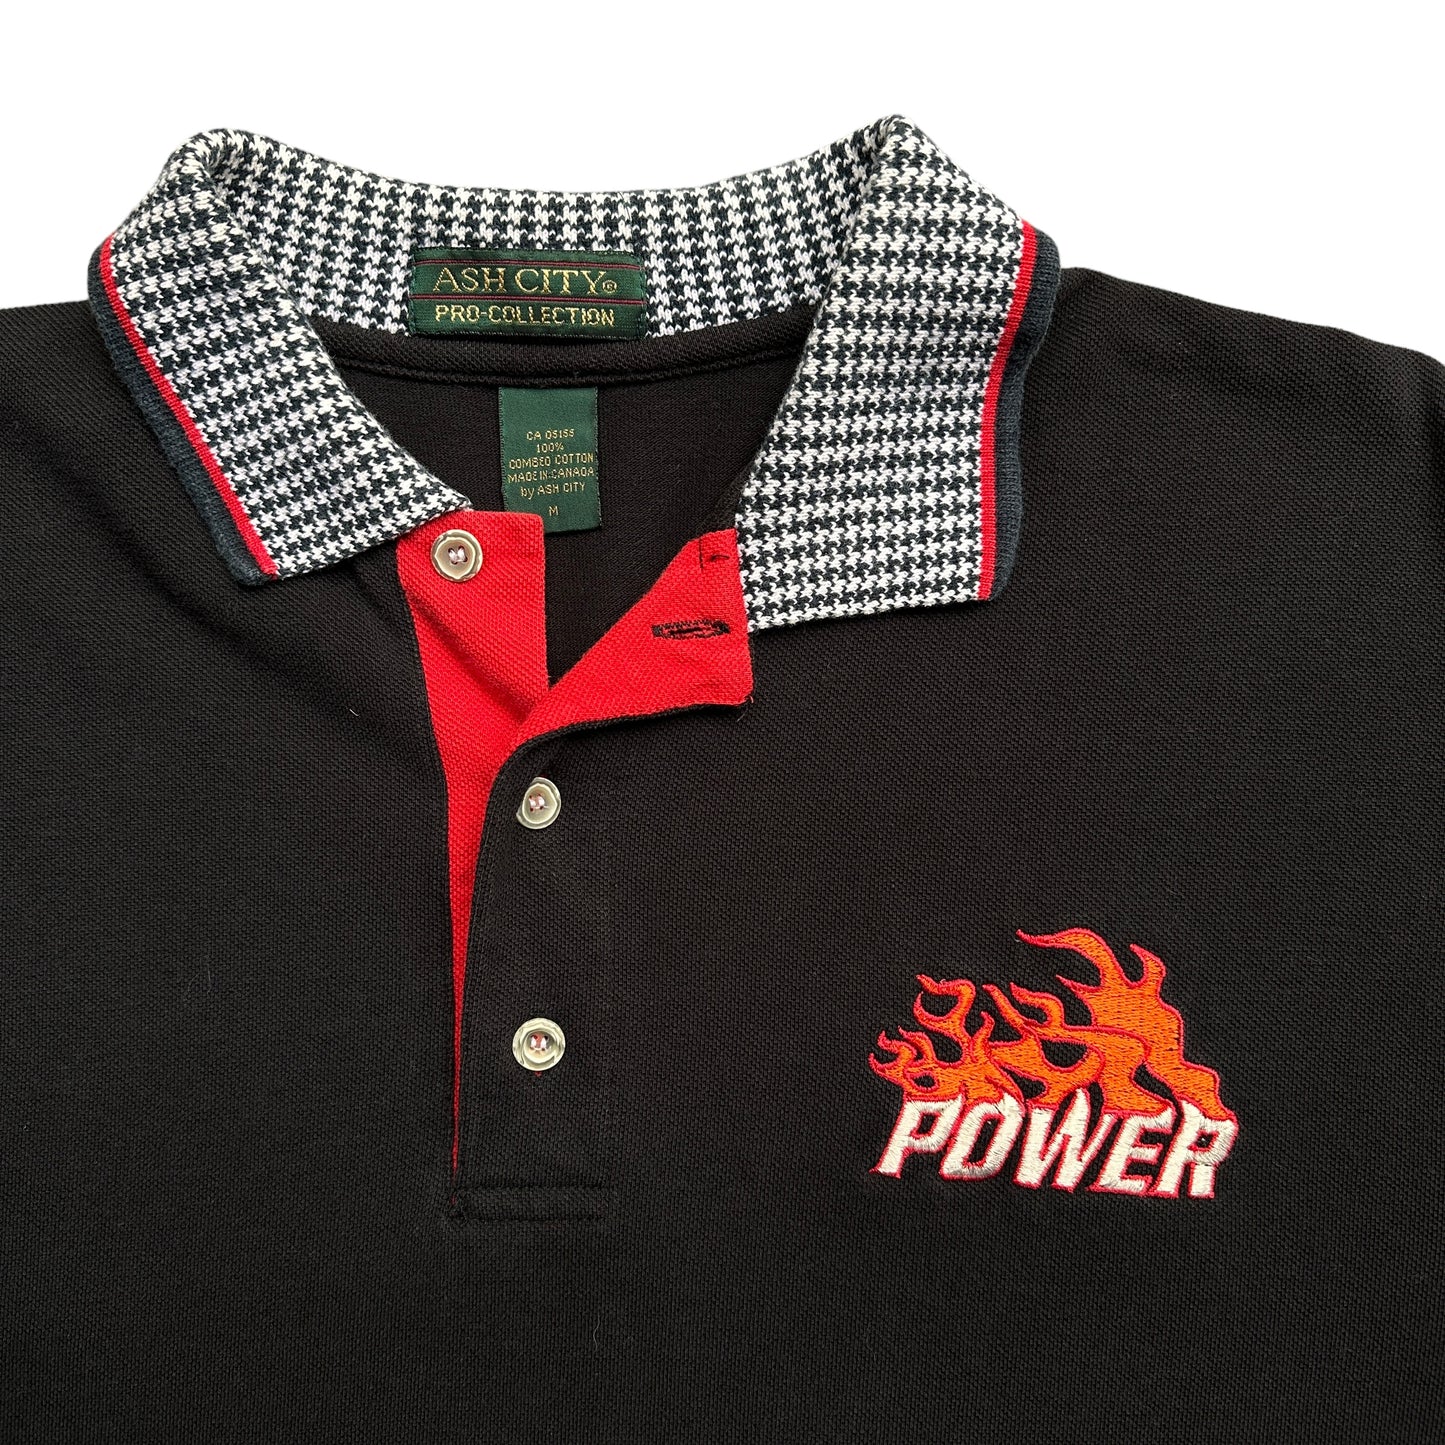 Power storm polo shirt large fit